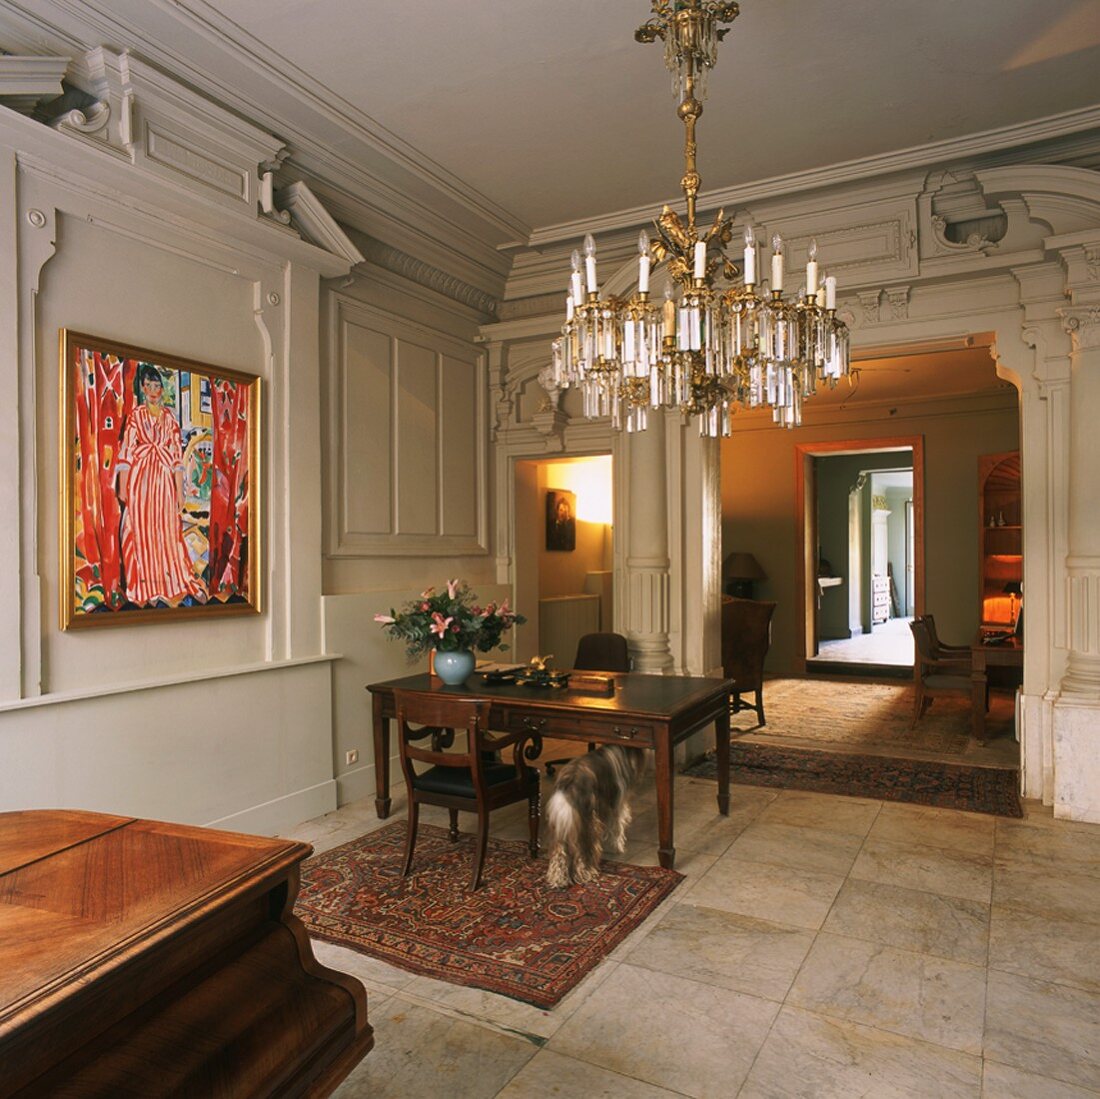 Grand office with antique wooden table, marble tiles, sumptuous chandelier and gilt-framed painting